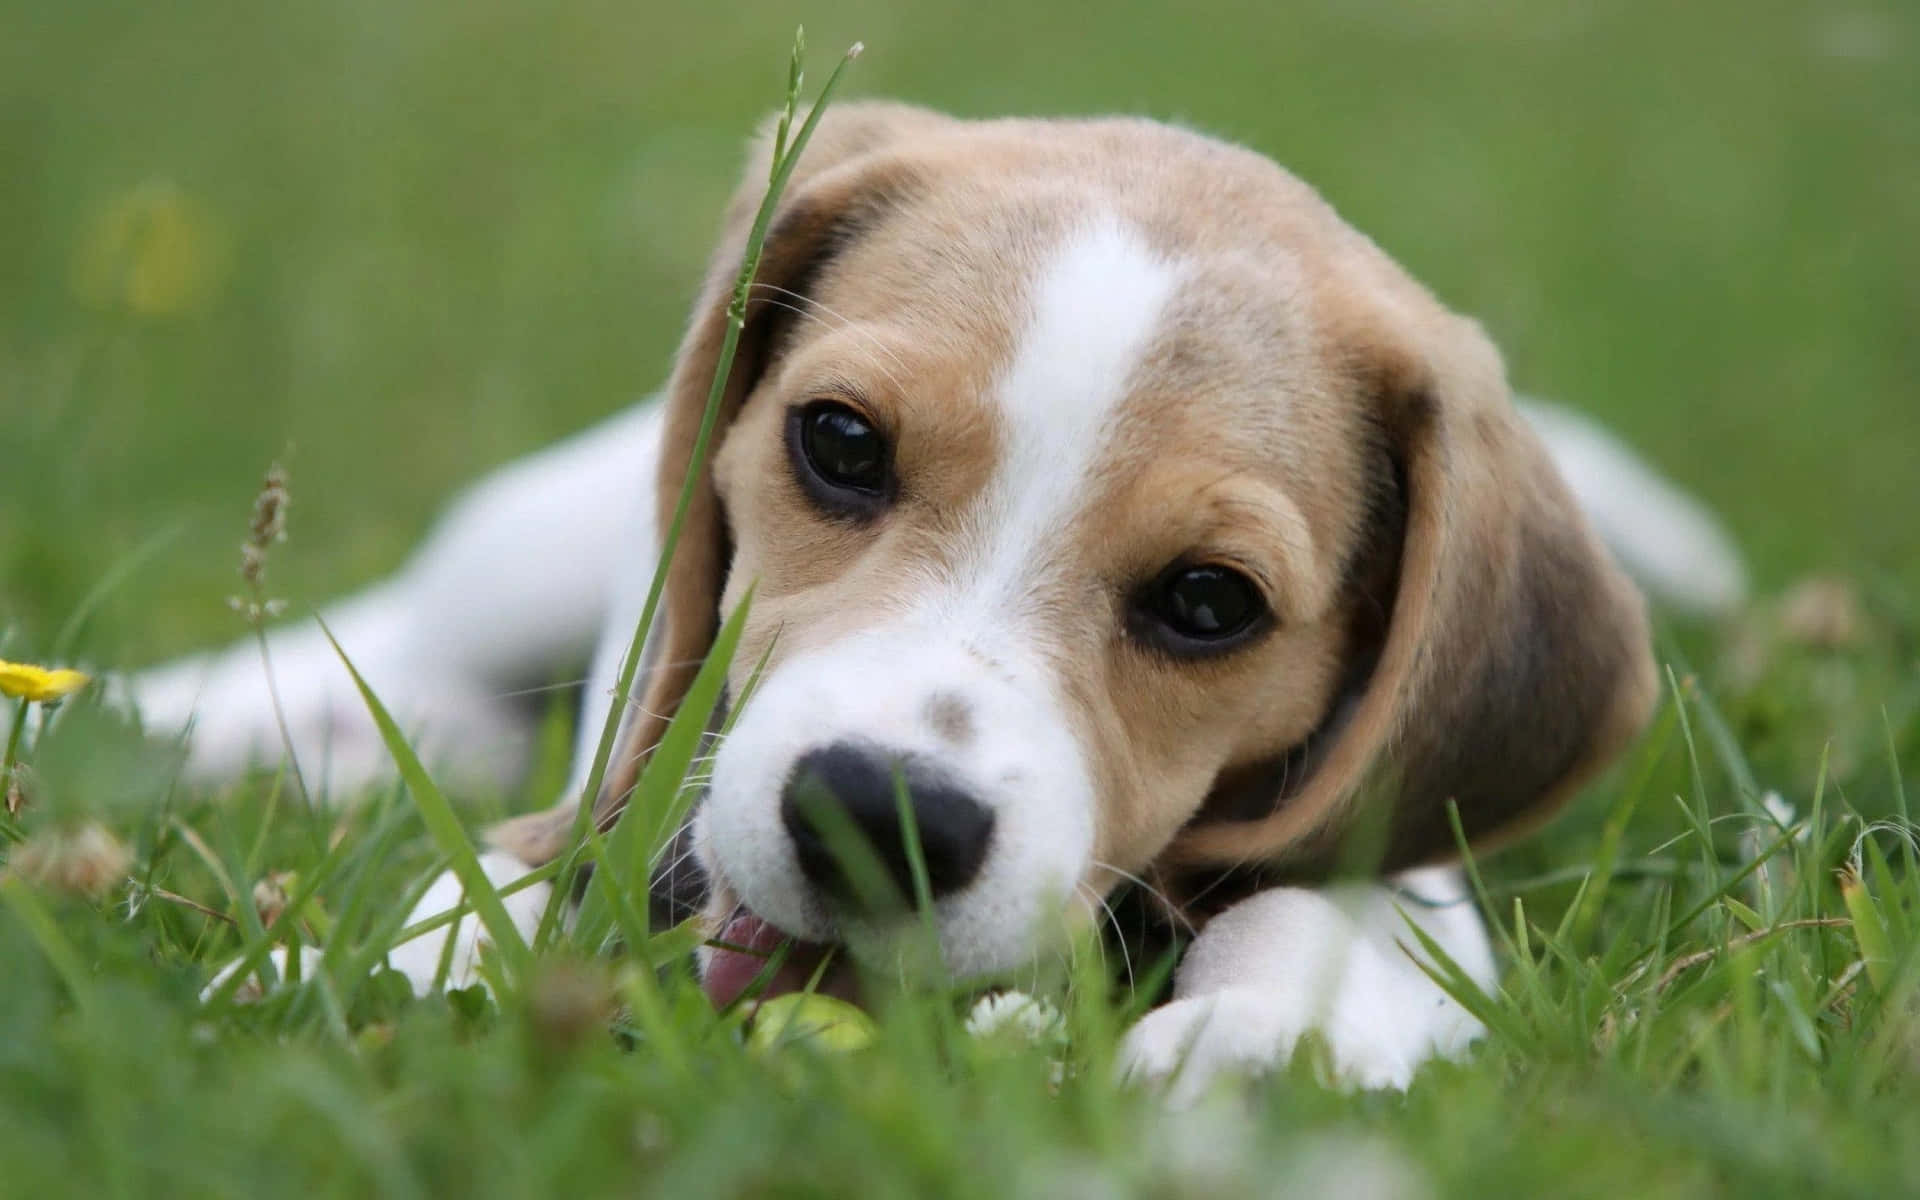 This adorable Beagle puppy is ready to snuggle up and get cozy